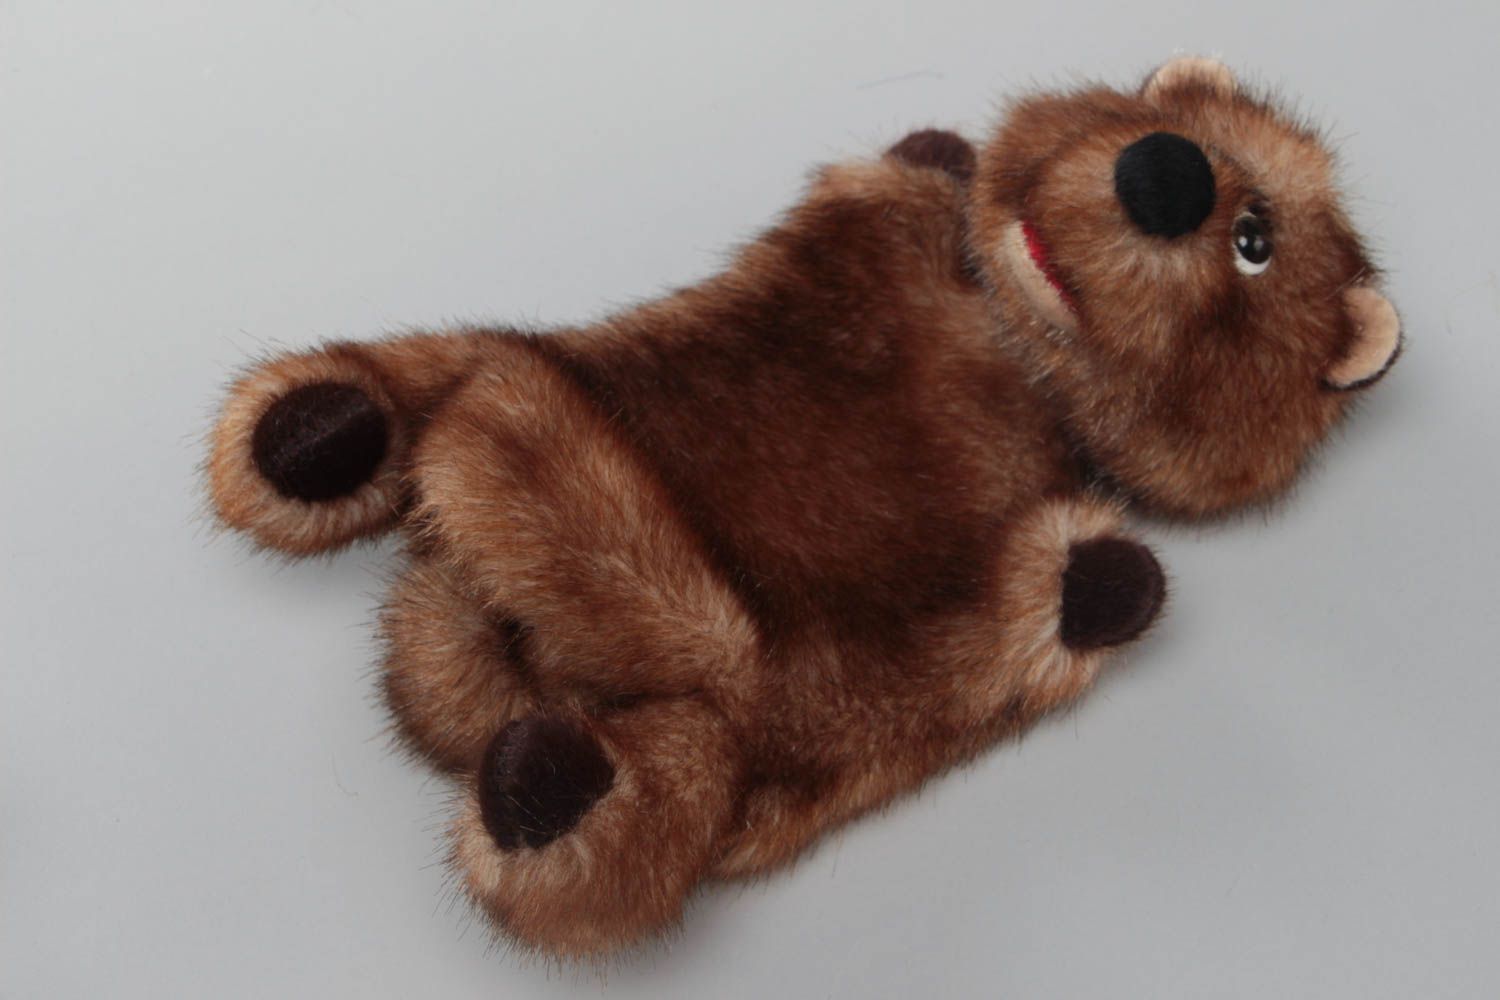 Handmade soft glove toy sewn of brown faux fur bear cub for puppet theater photo 2